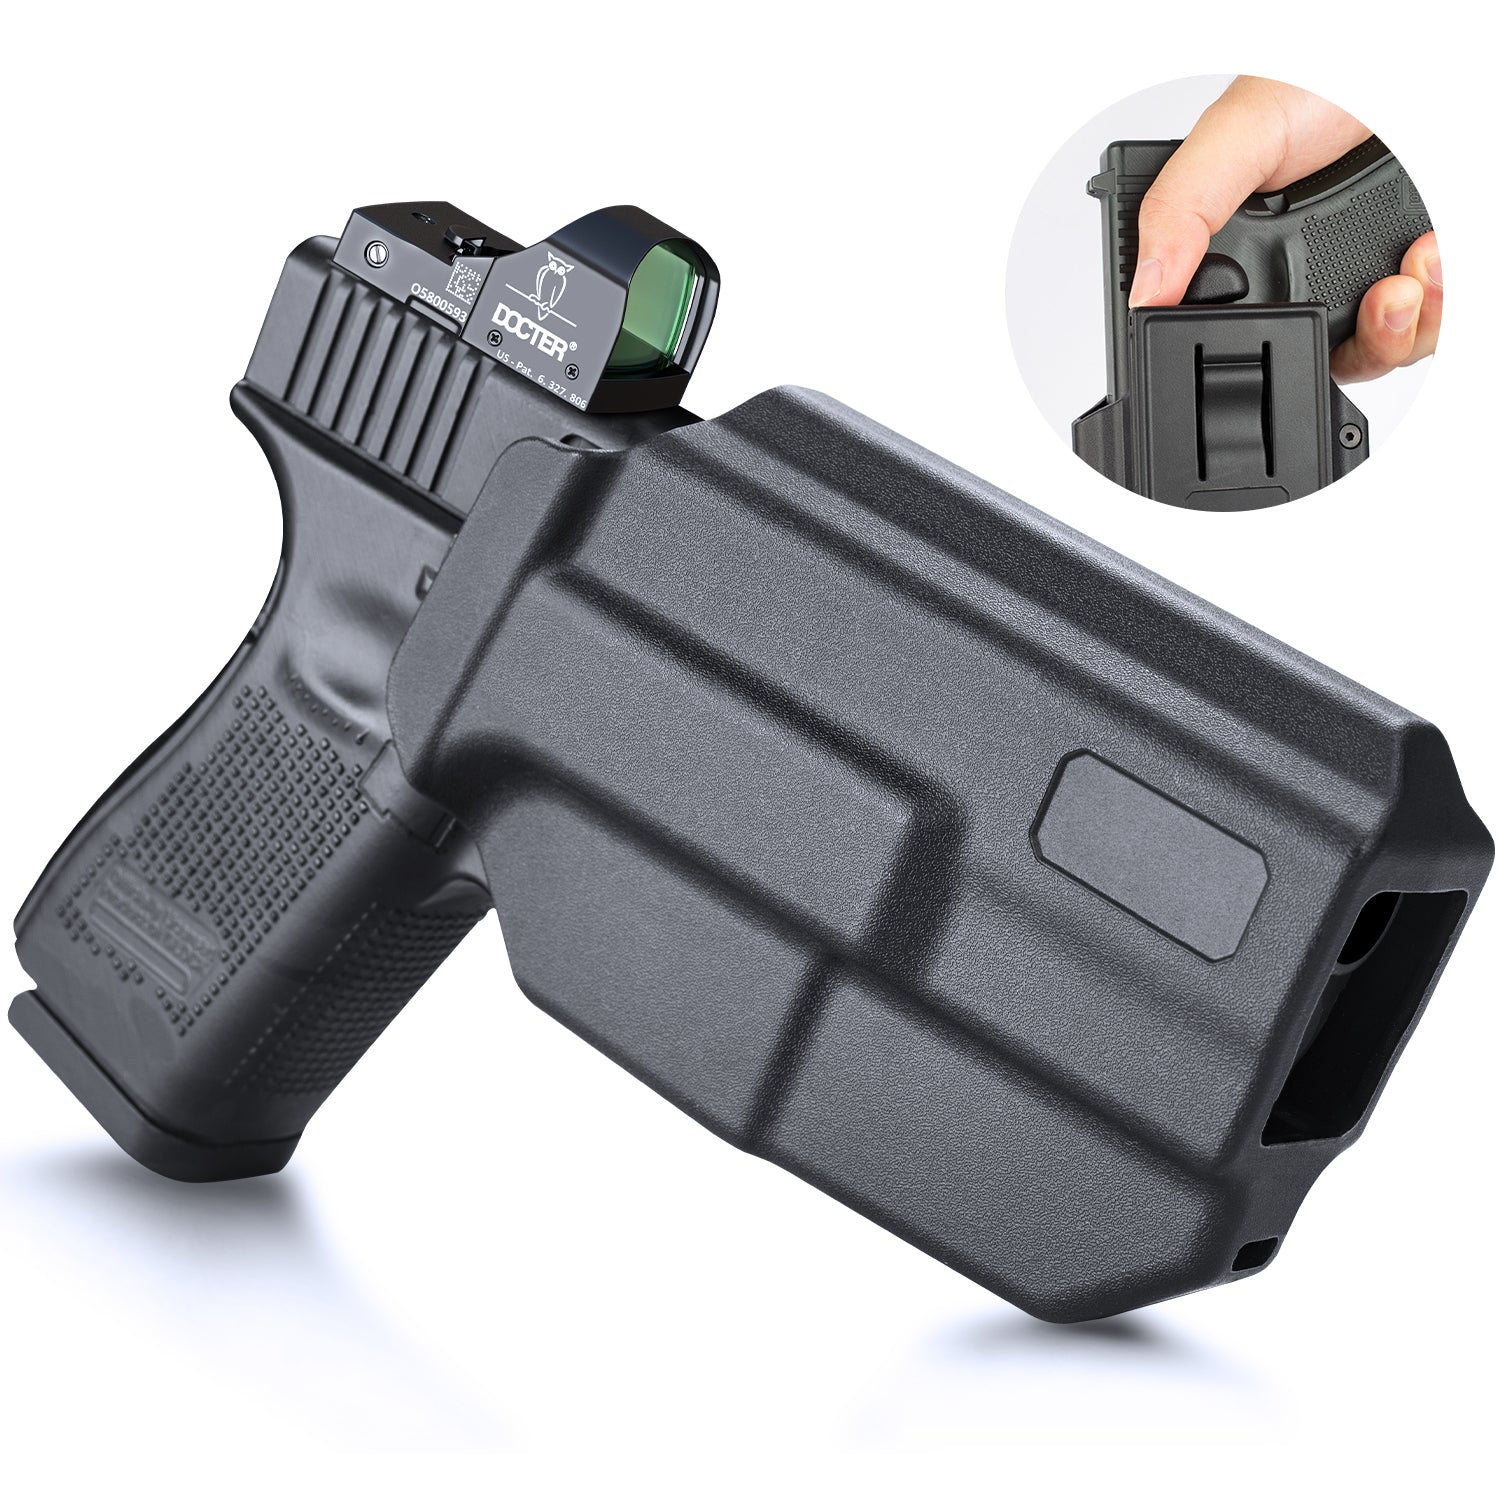 Flint - AIWB/IWB holster for concealed carry